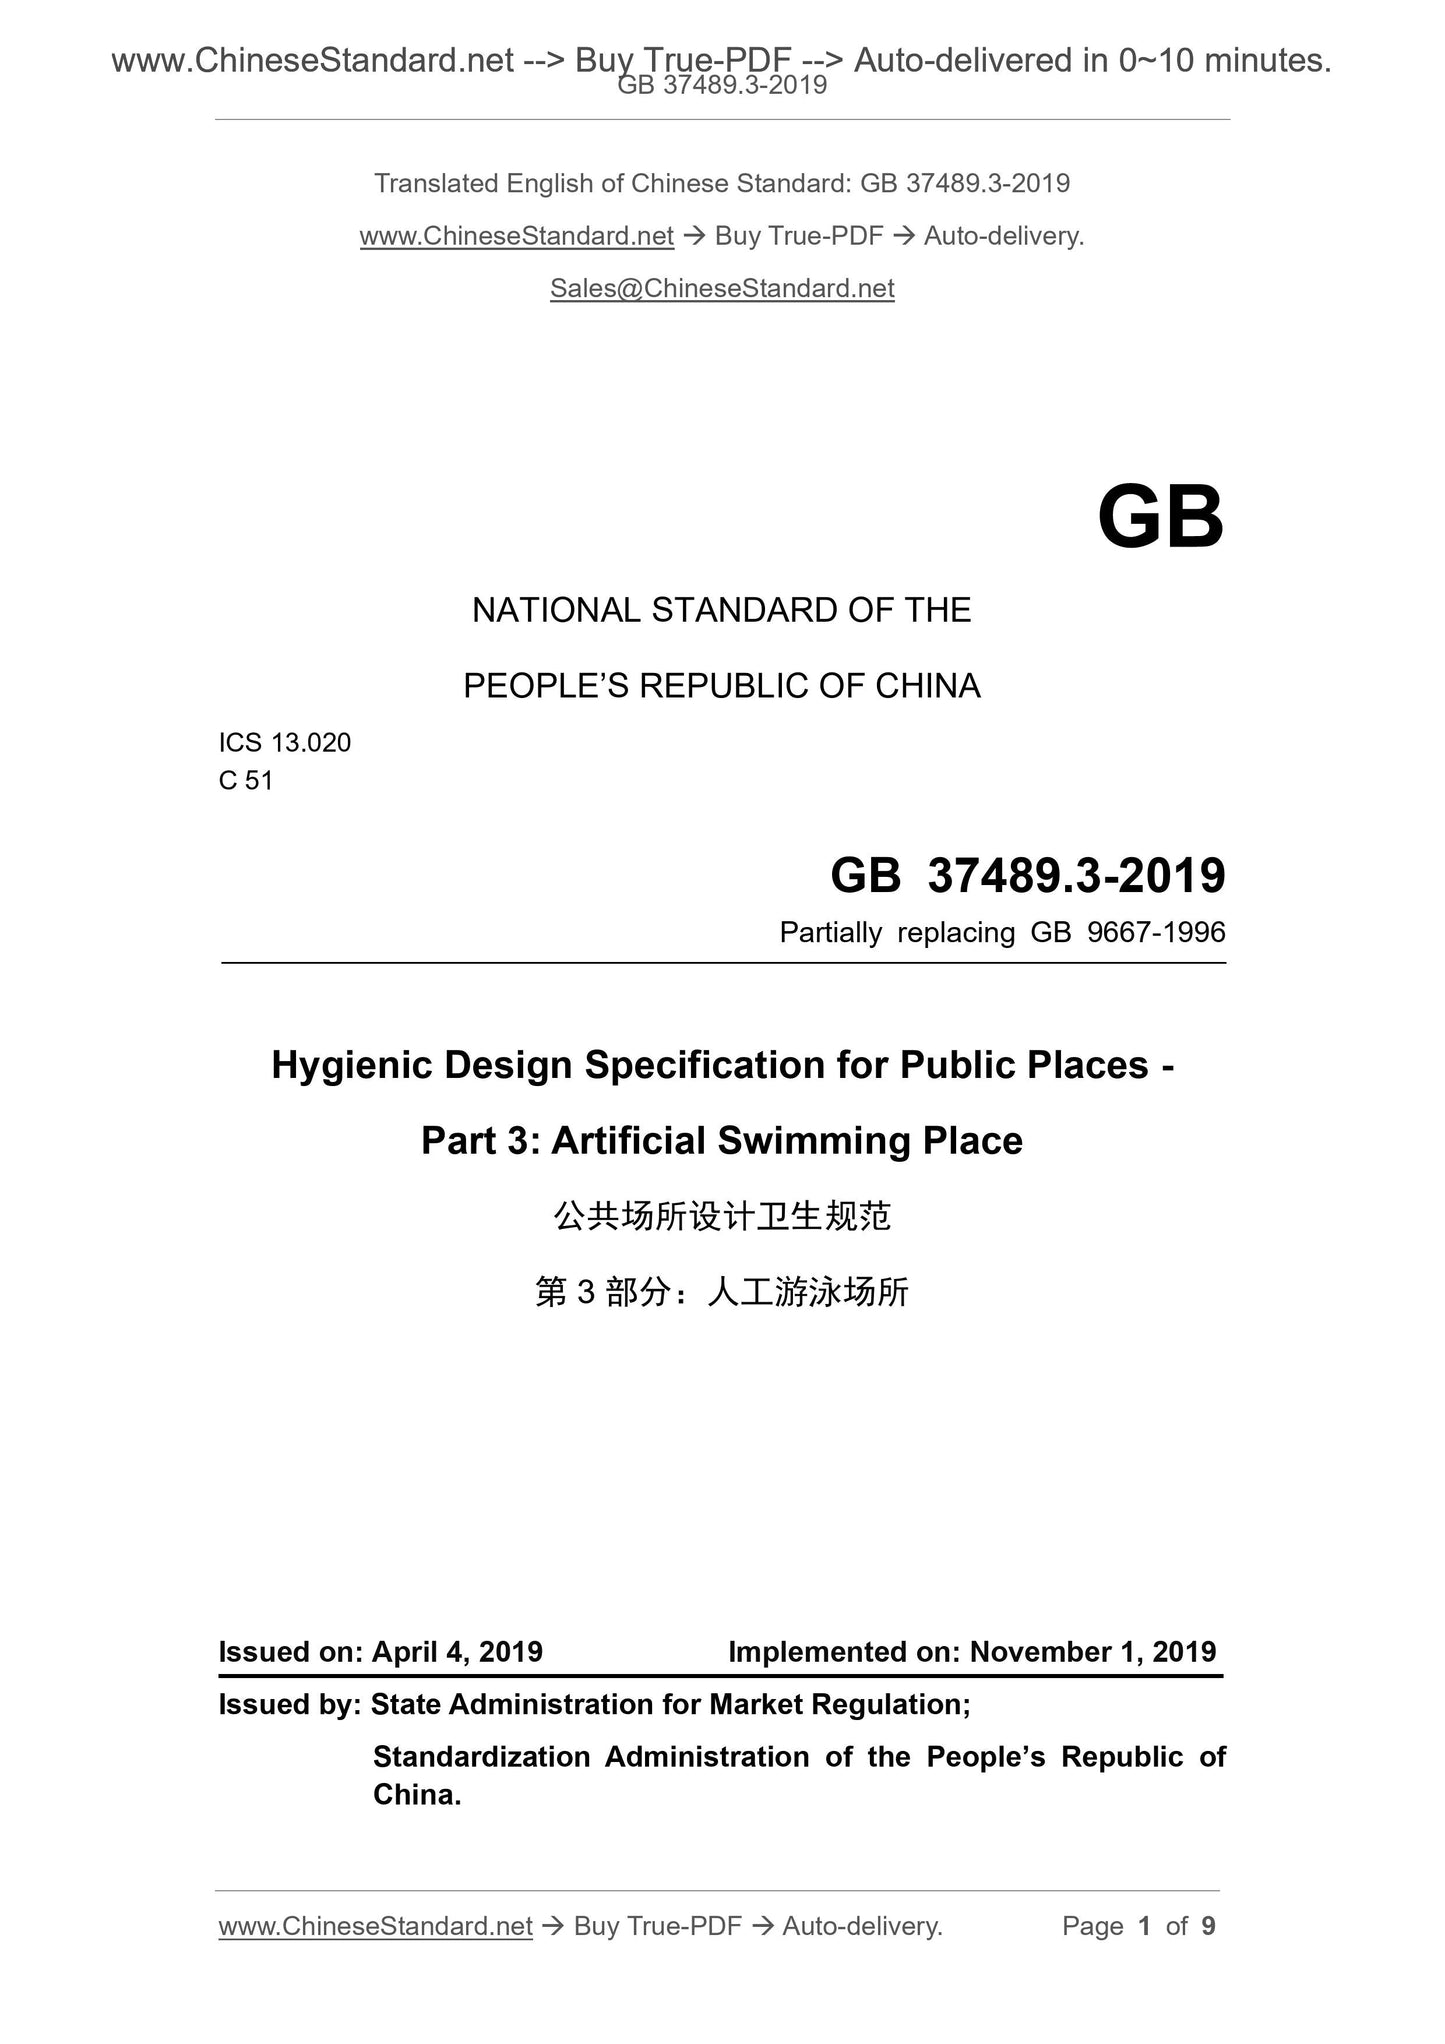 GB 37489.3-2019 Page 1